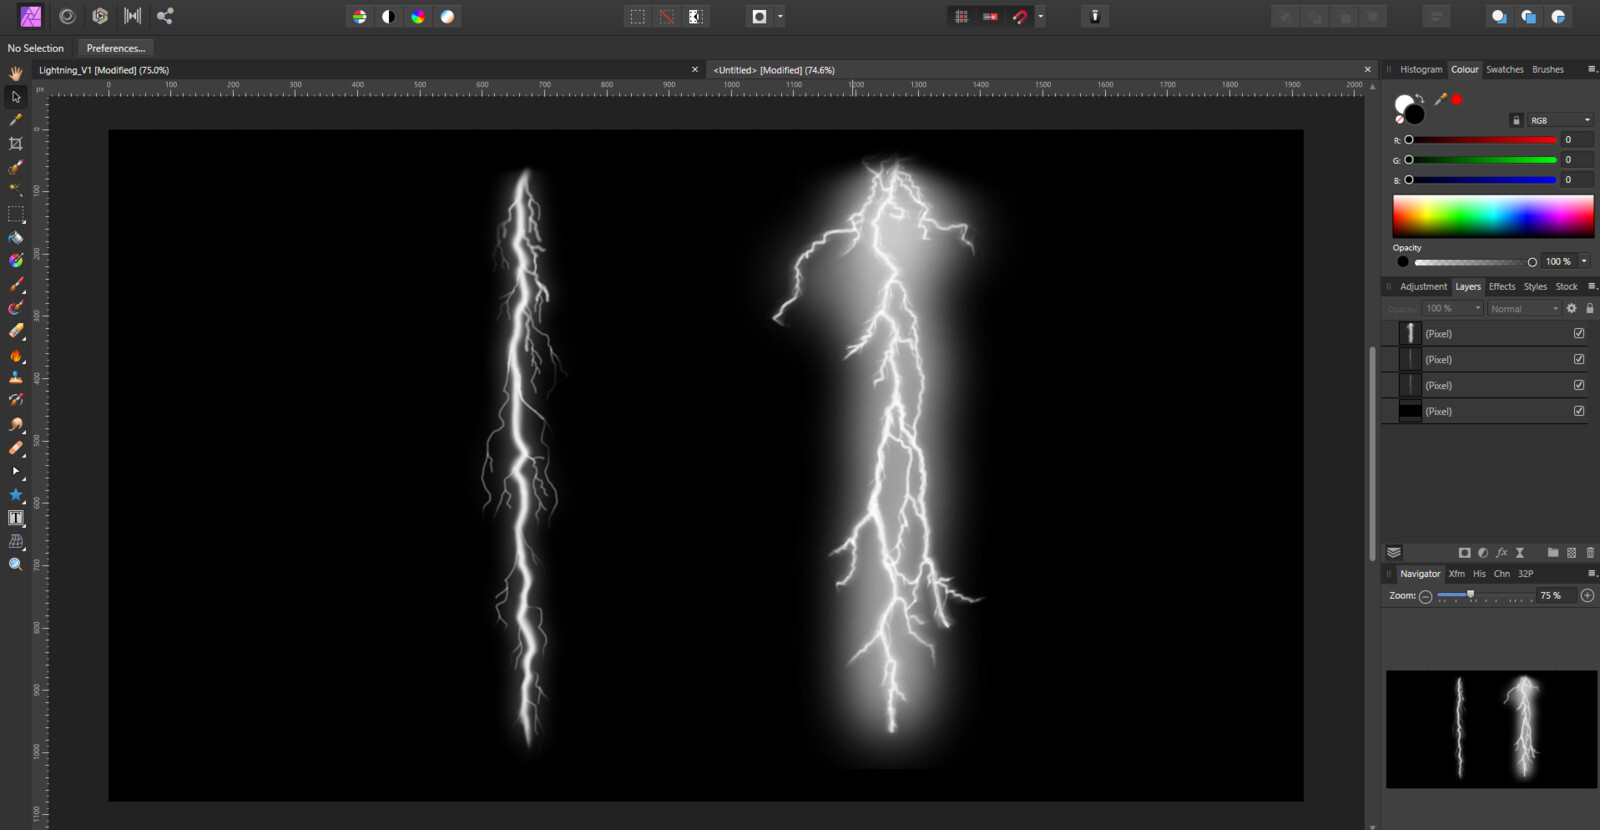 Two lightning bolts painted with my old Wacom tablet